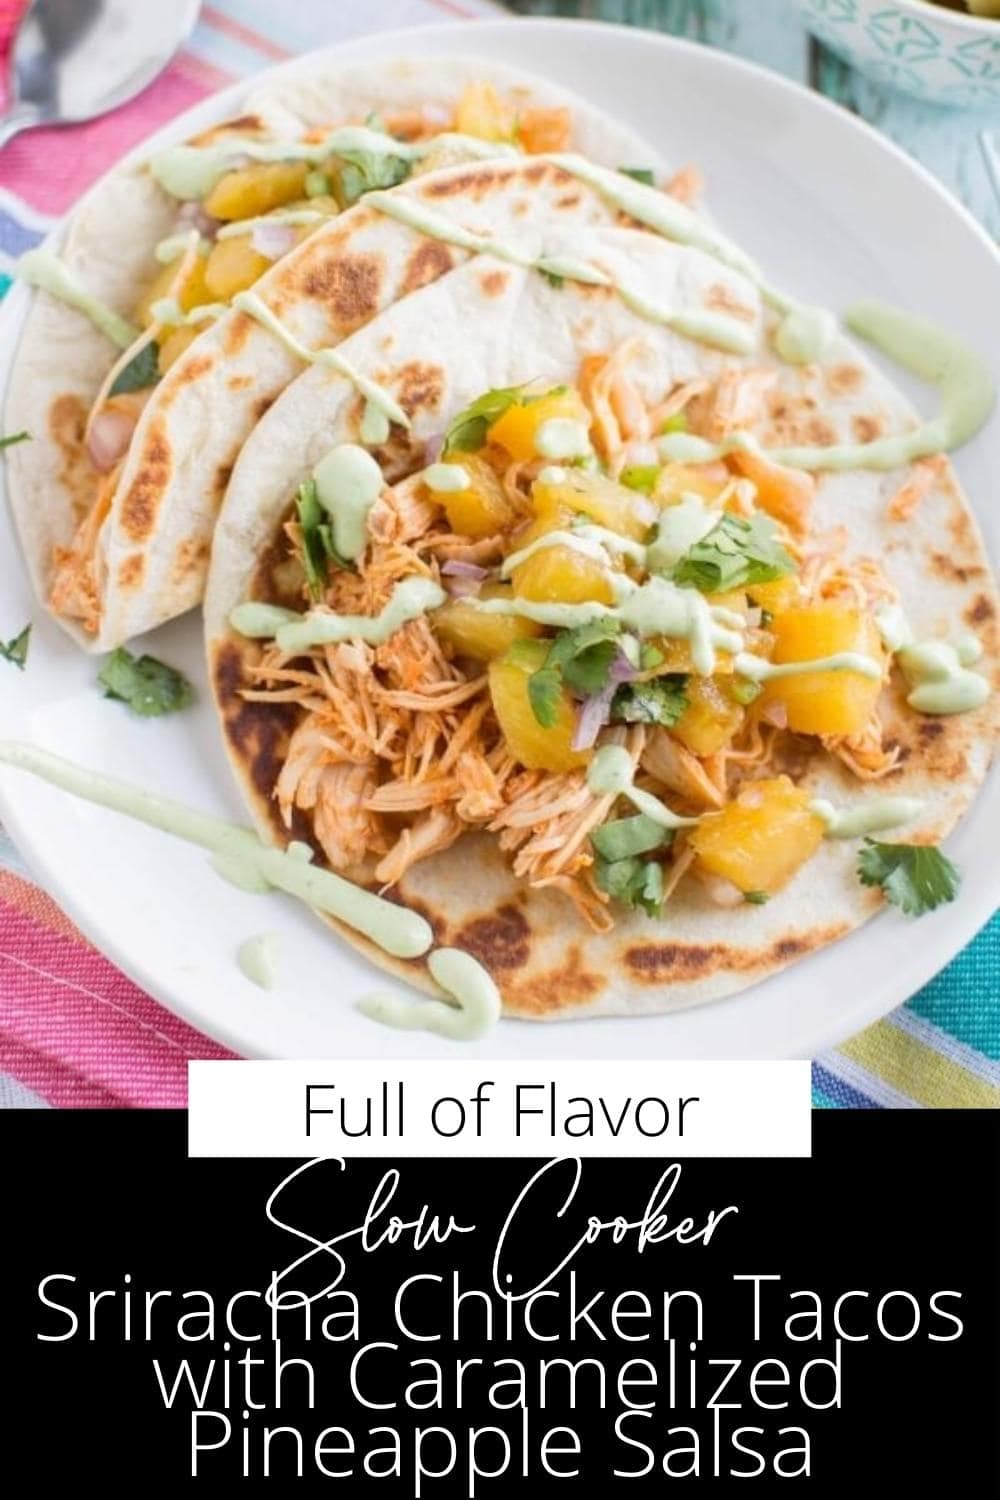 Slow Cooker Sriracha Chicken Tacos with Caramelized Pineapple Salsa ...